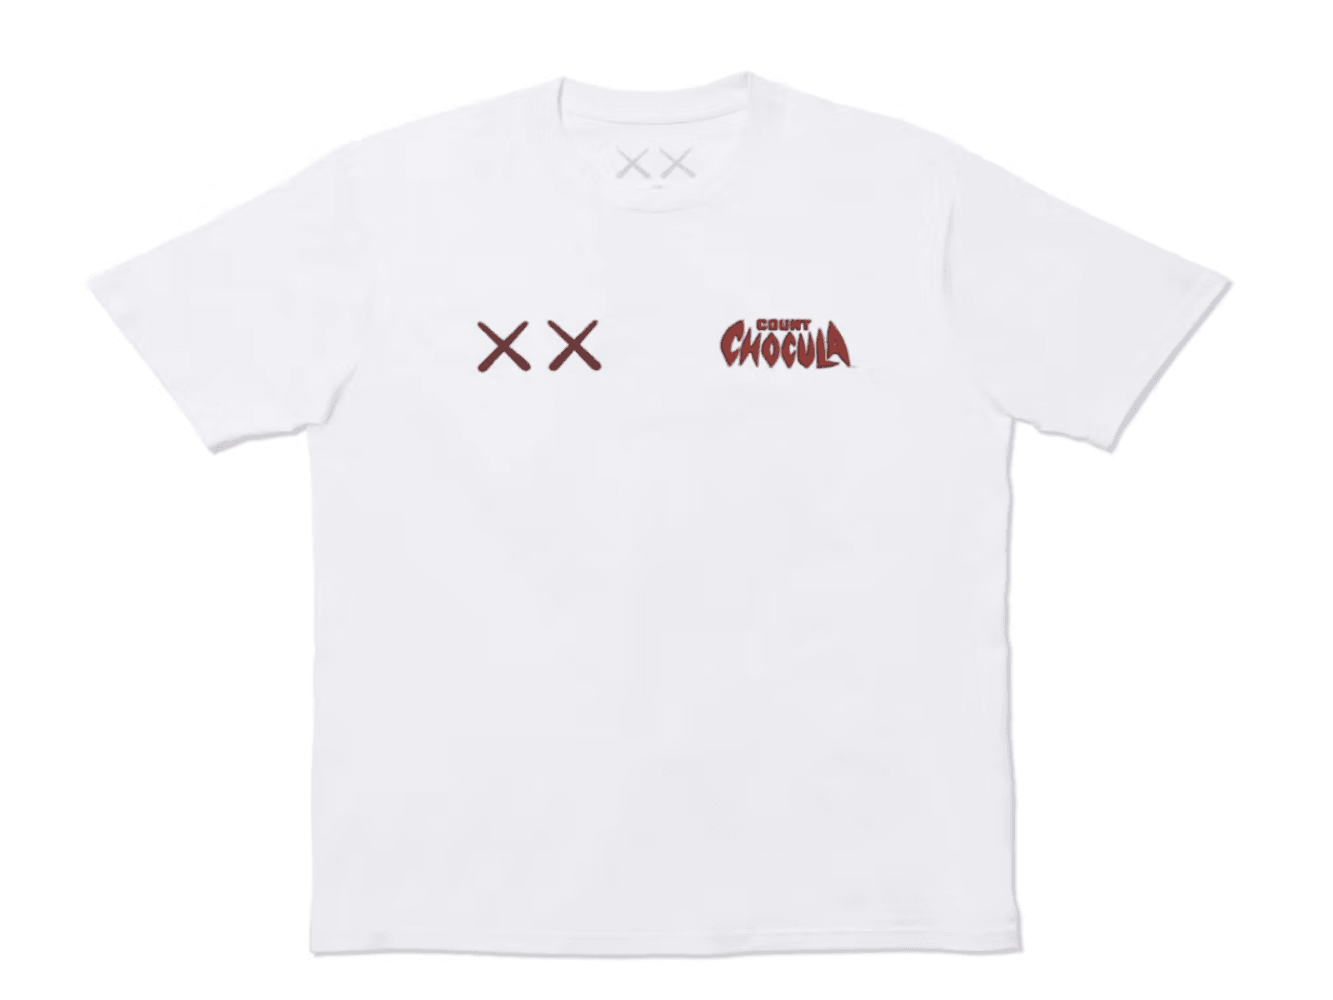 KAWS x MONSTERS COUNT CHOCULA T SHIRT - The Flaire